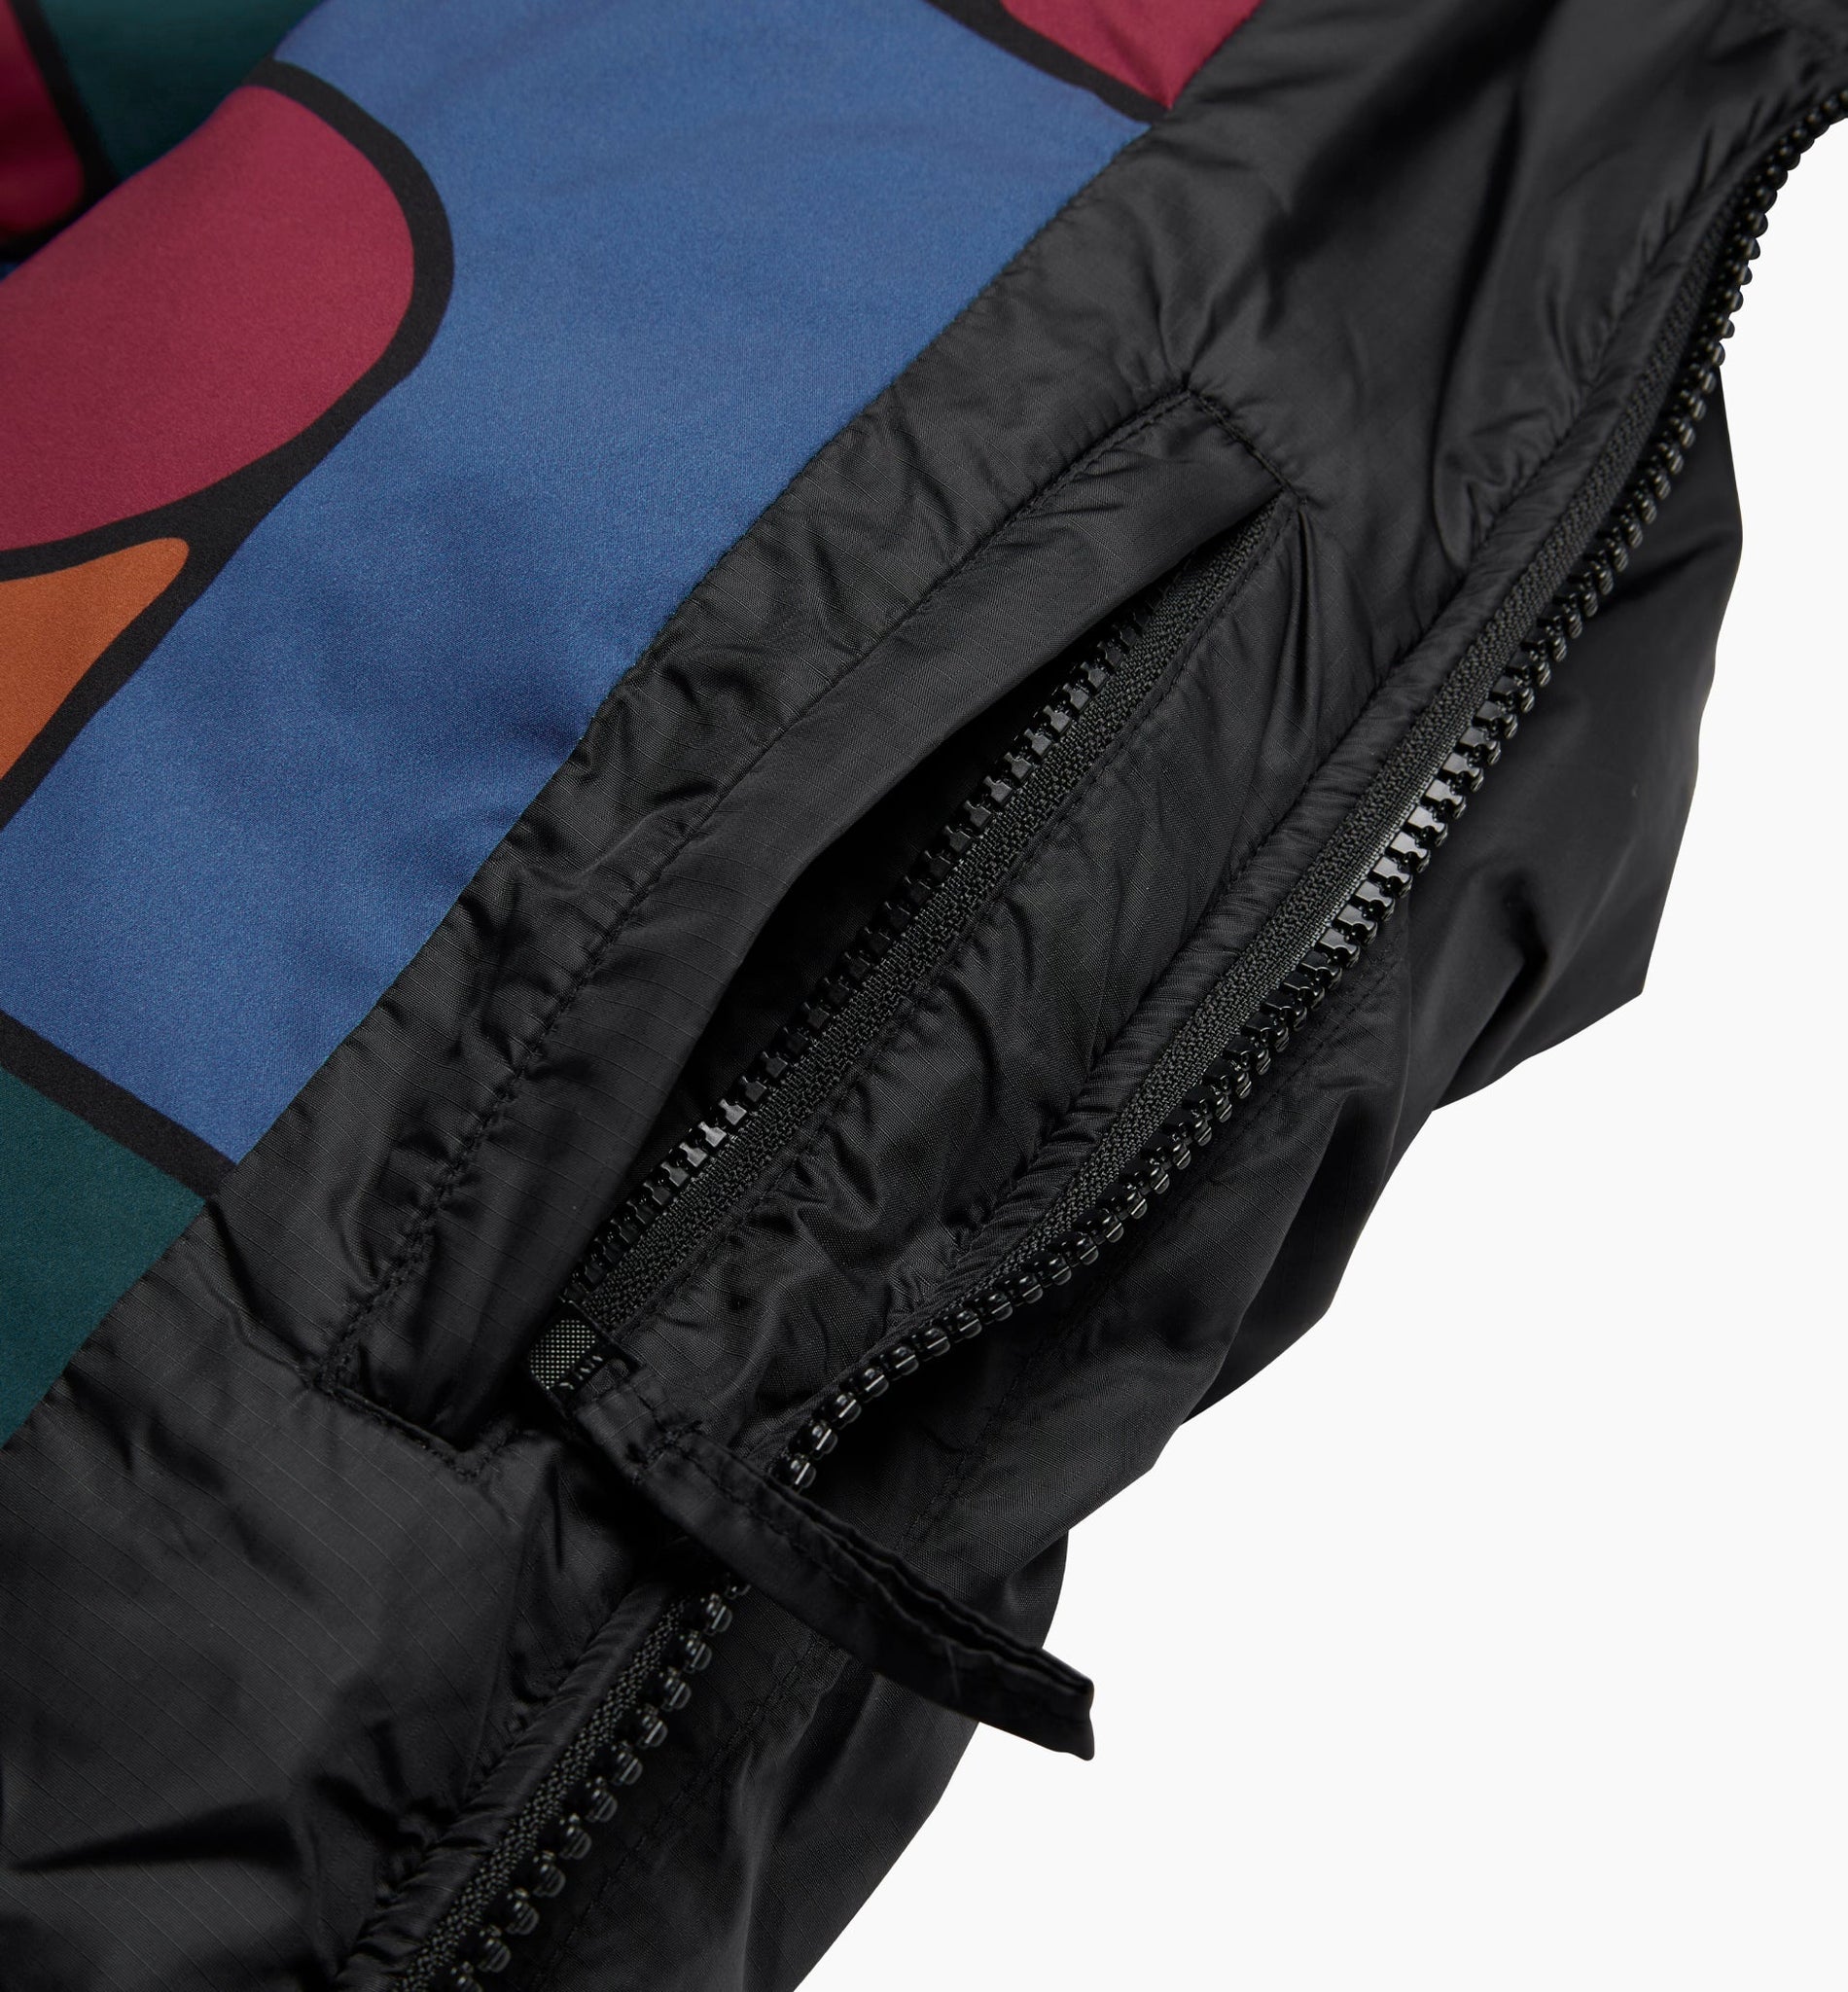 Canyons All Over Jacket - Black